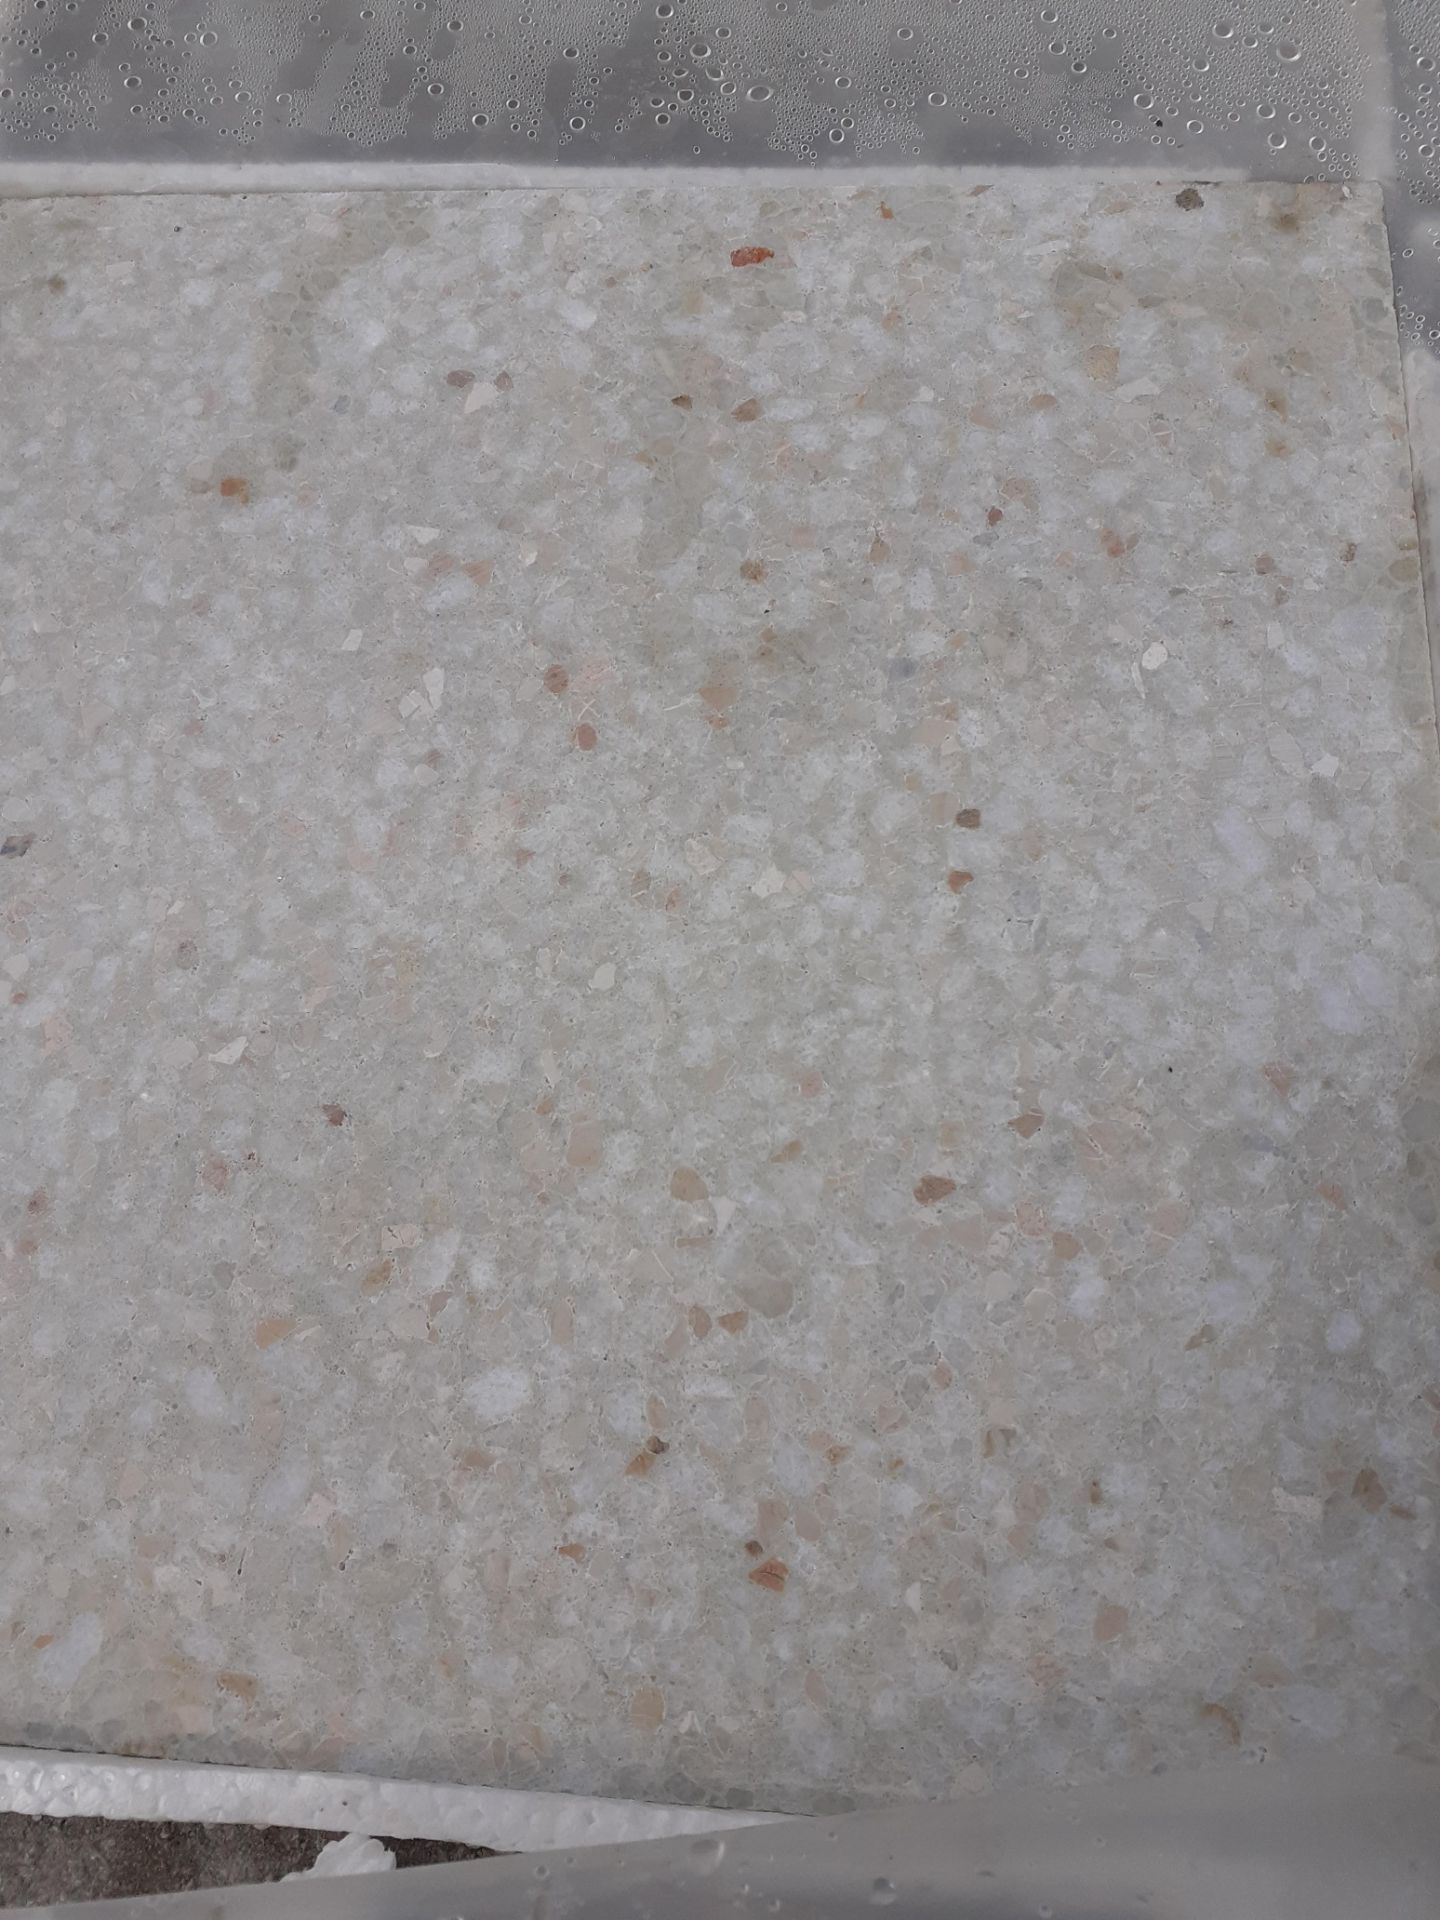 1 PALLET OF BRAND NEW TERRAZZO COMMERCIAL FLOOR TILES (Z30011), COVERS 24 SQUARE YARDS *PLUS VAT* - Image 13 of 14